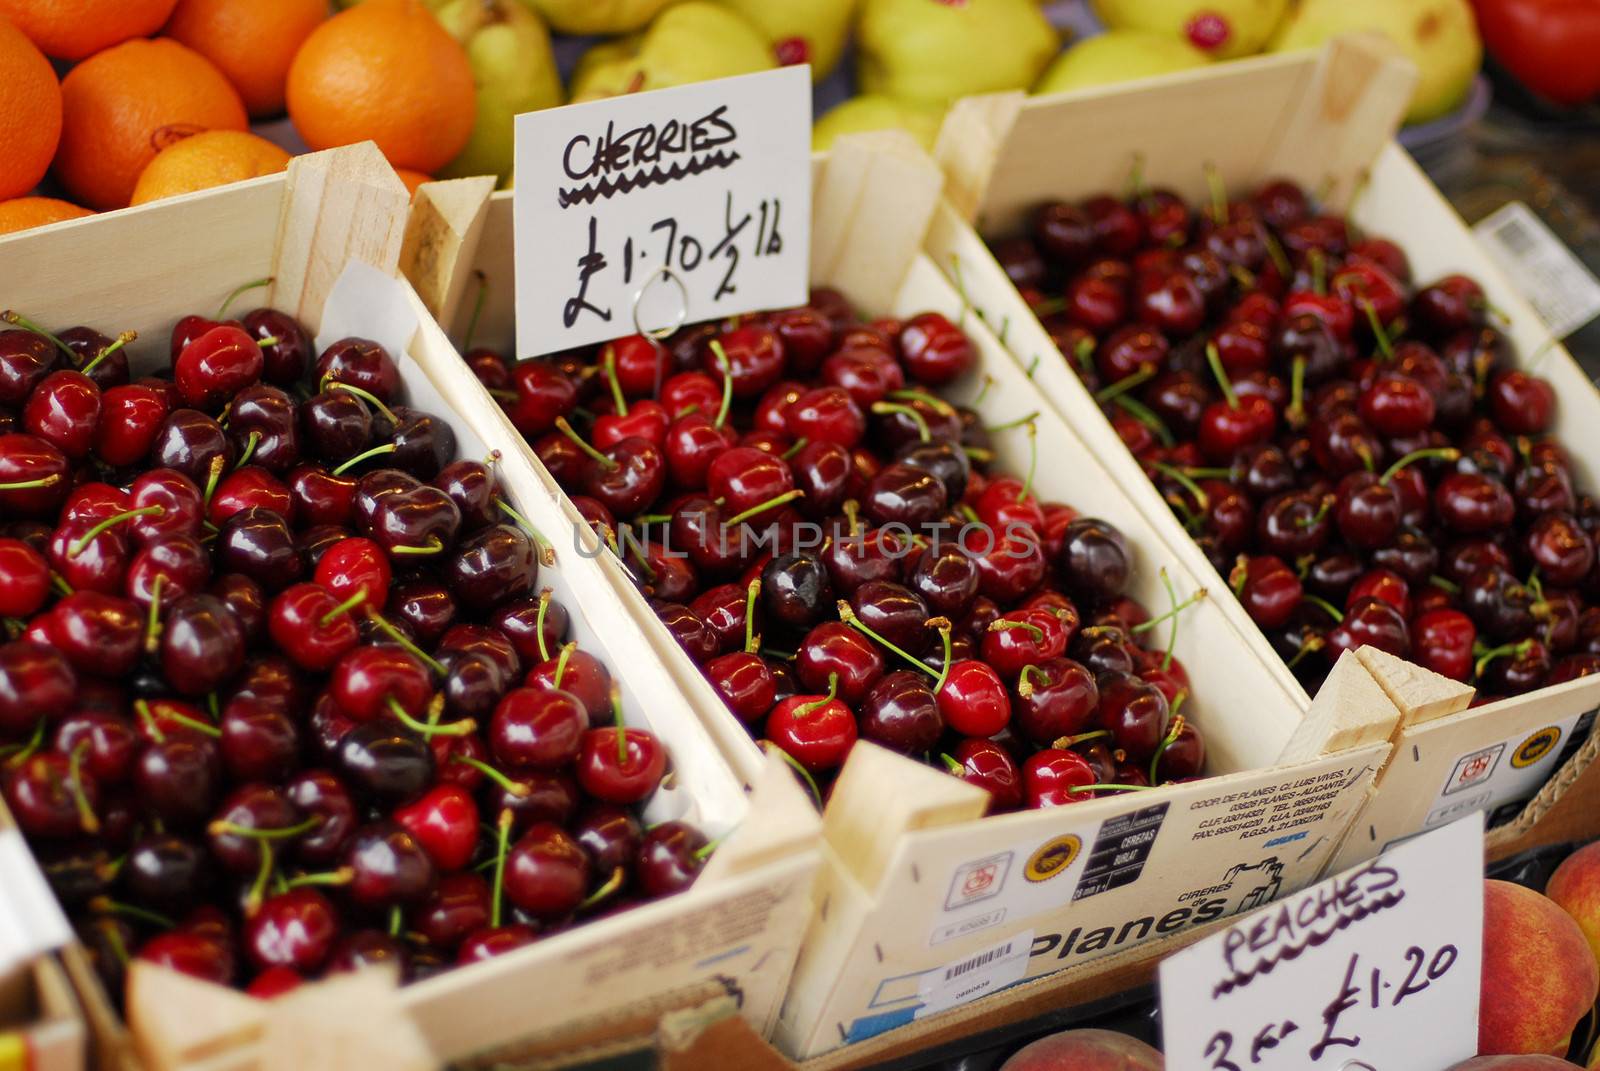 Cherries in focus along with other fruits being sold at market